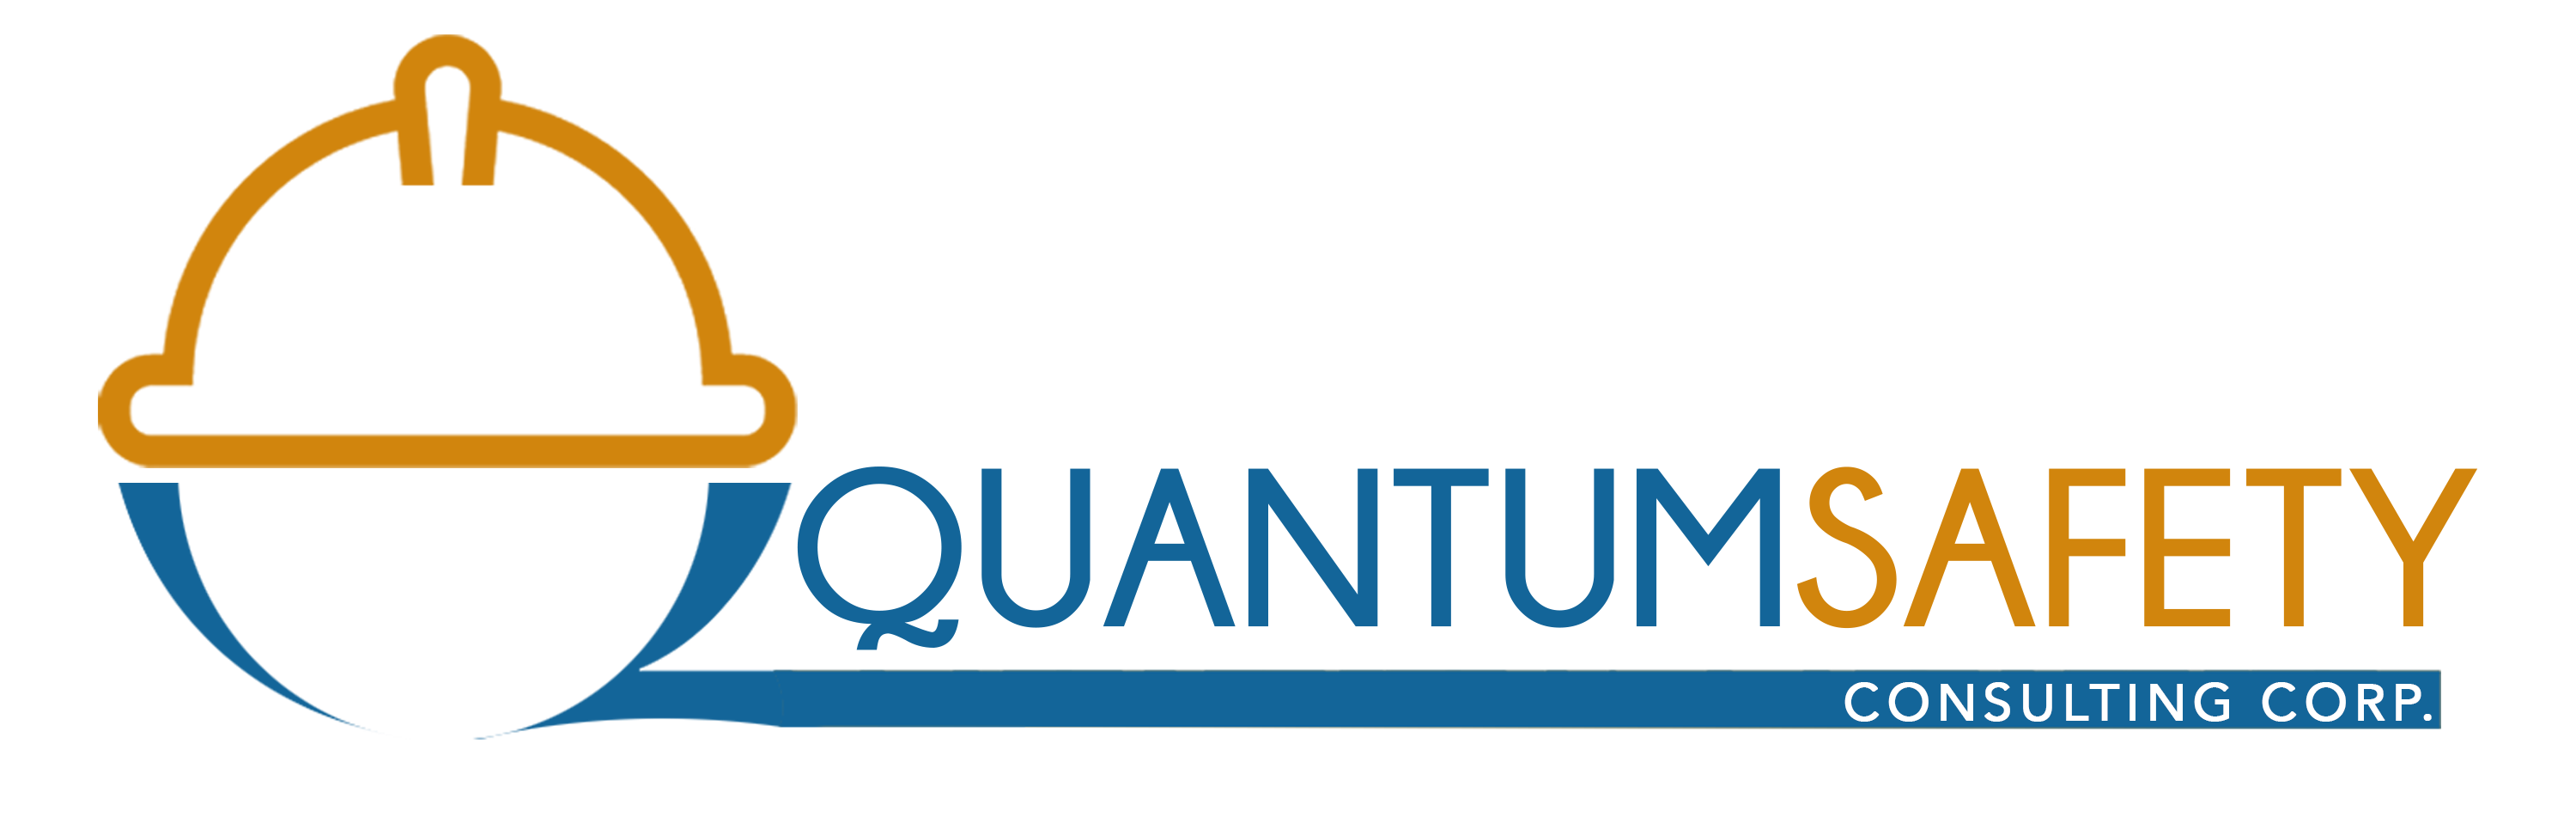 Quantum Safety Consulting Corp